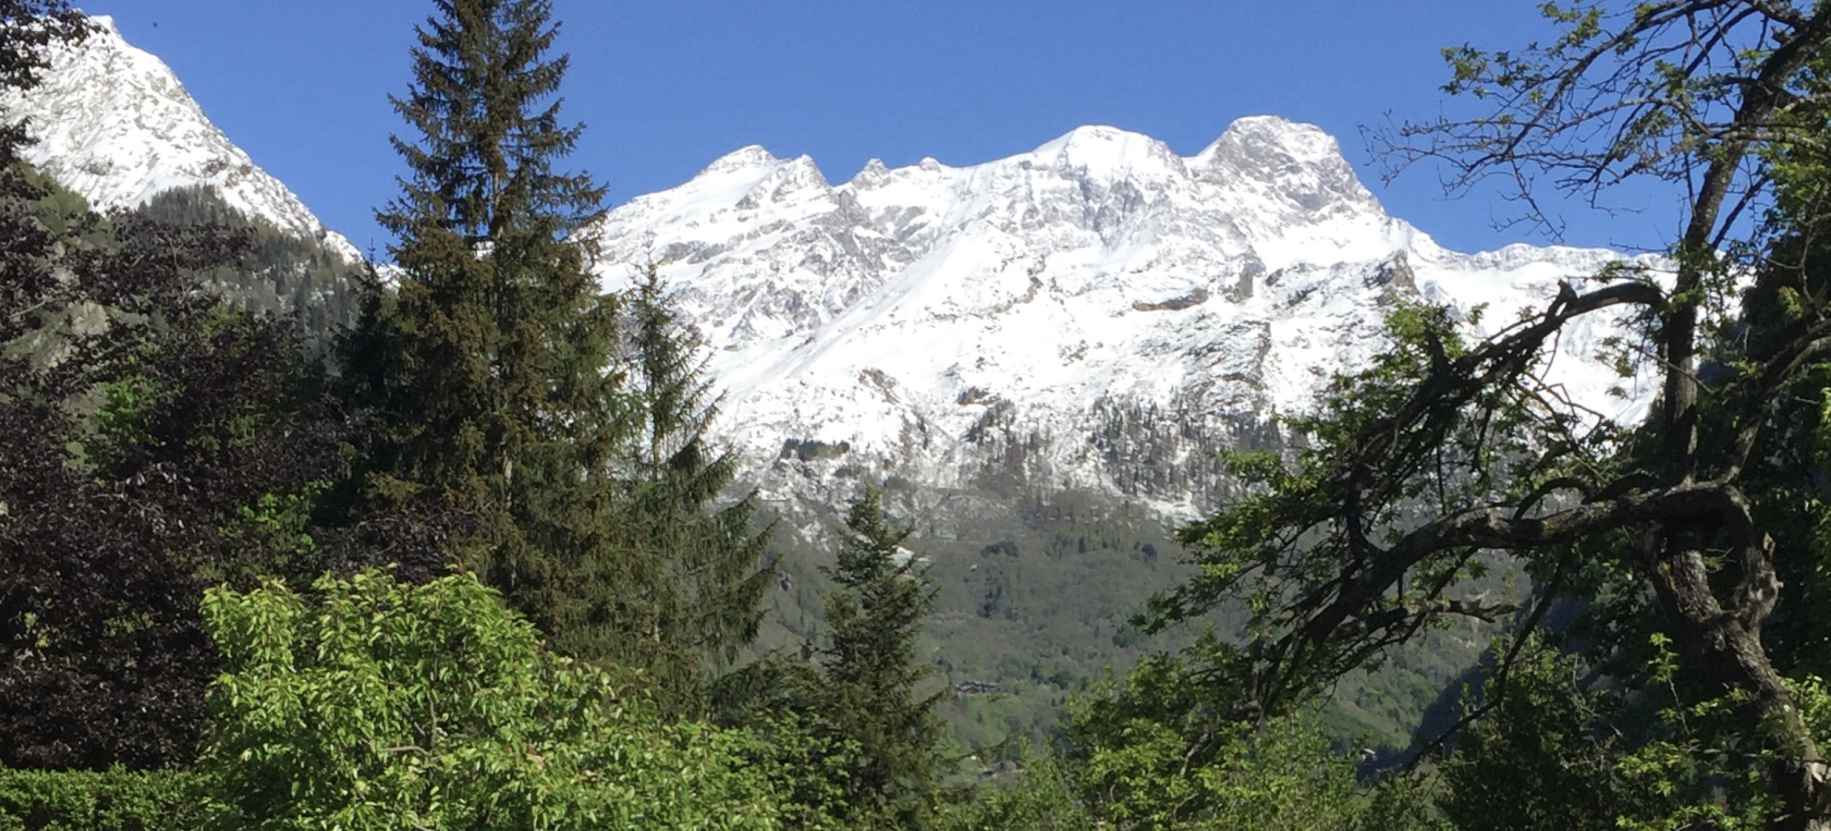 Monte Rosa seen from our garden